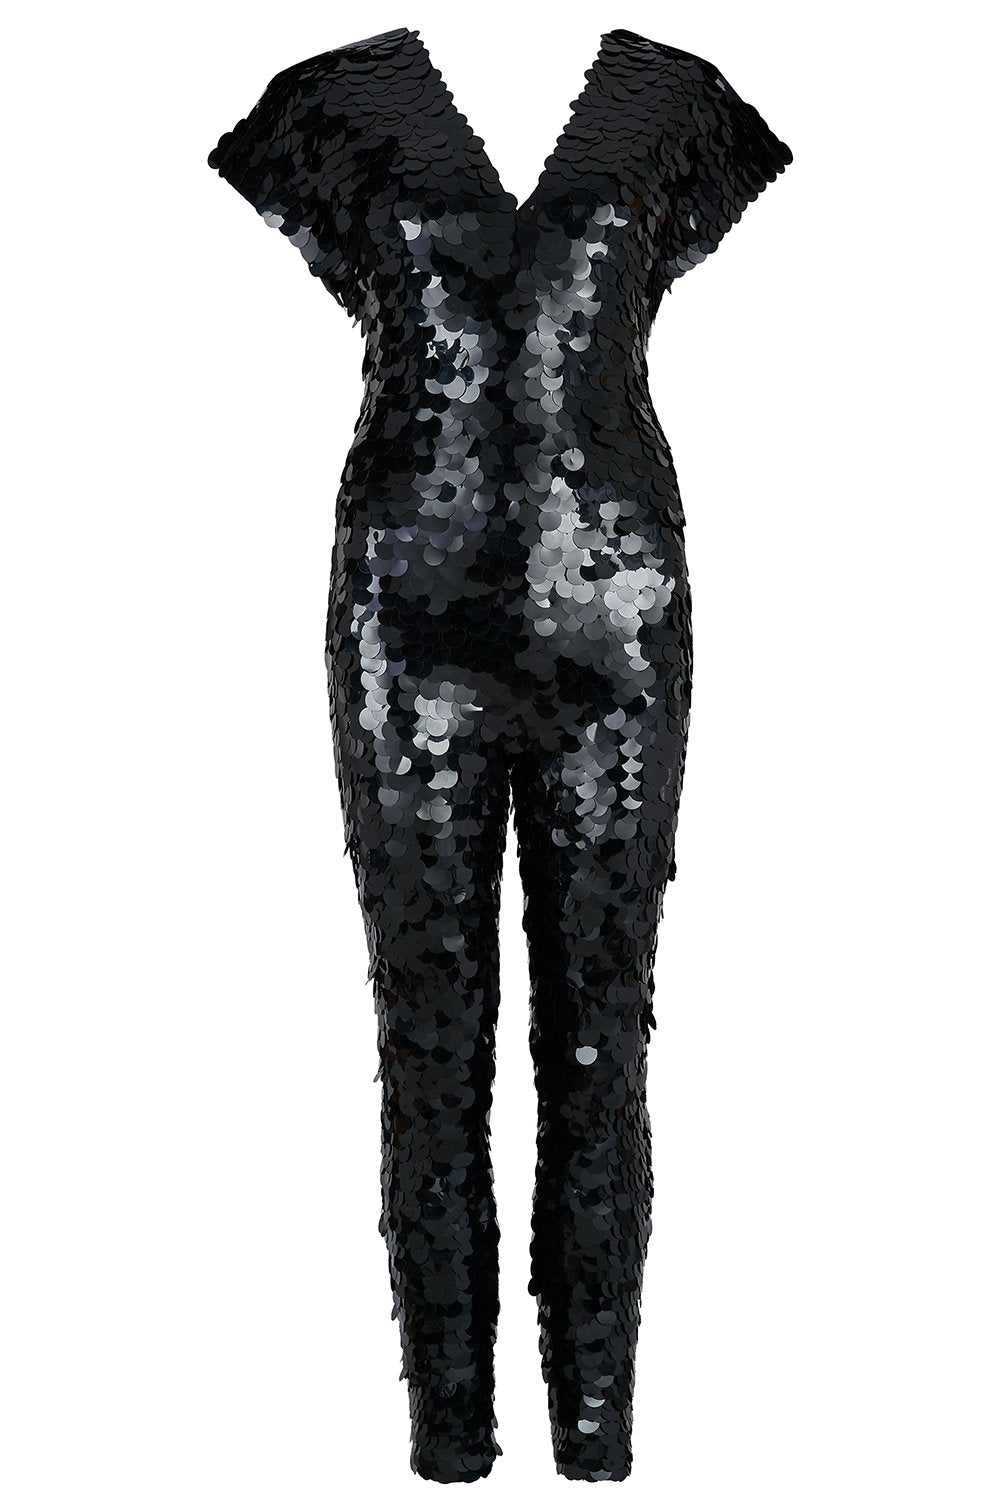 A catsuit covered in large round black sequins